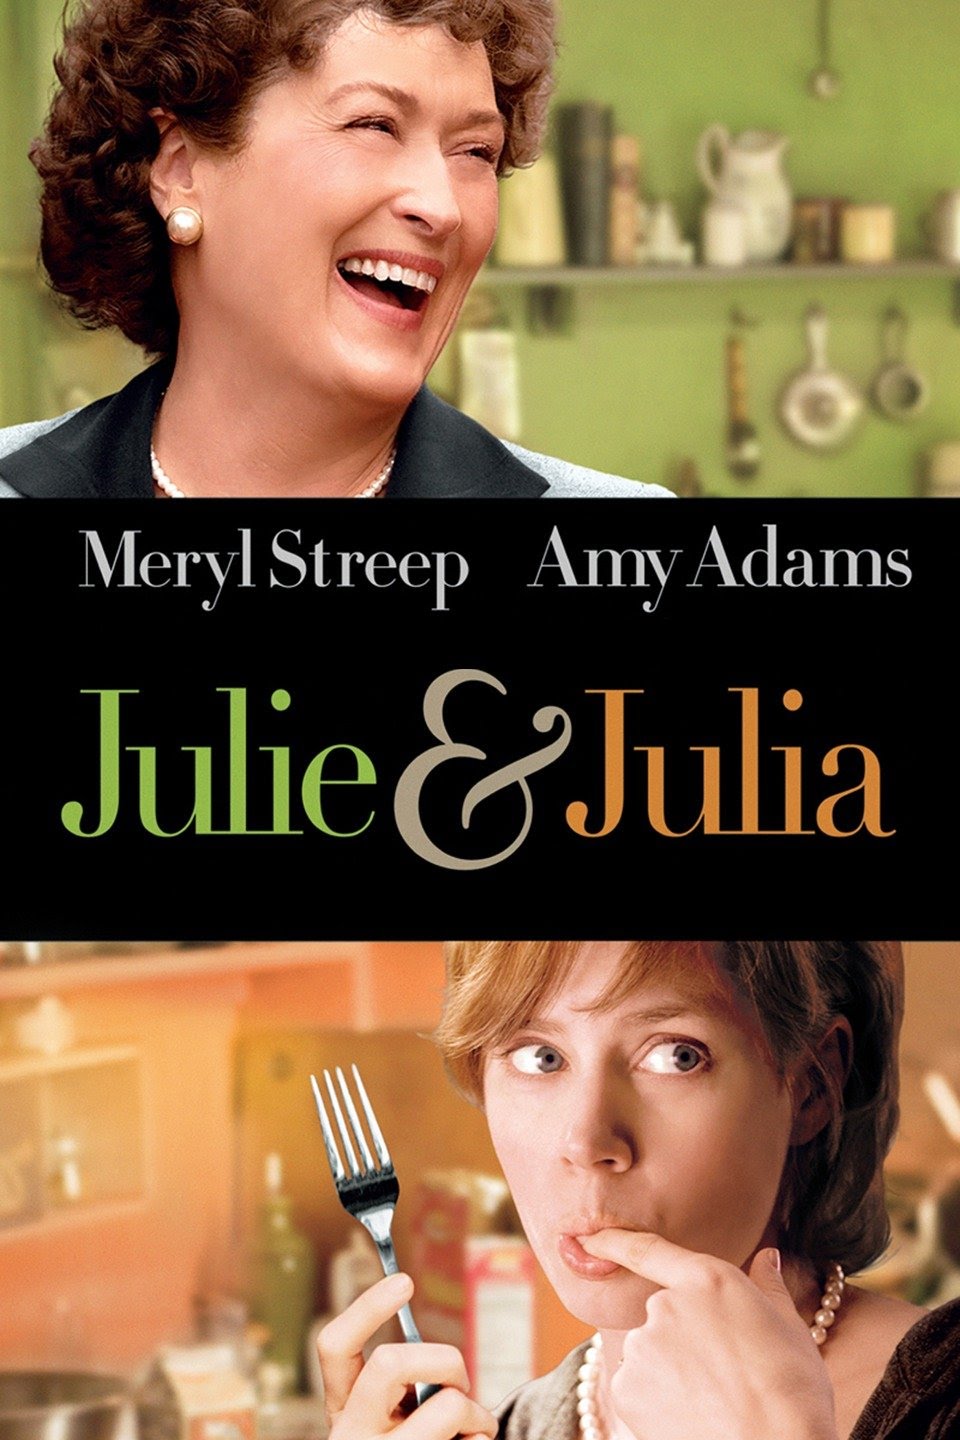 Julie & Julia film poster featuring Meryl Streep as chef Julia Childs on the top and underneath is Amy Adams playing Julie Powell